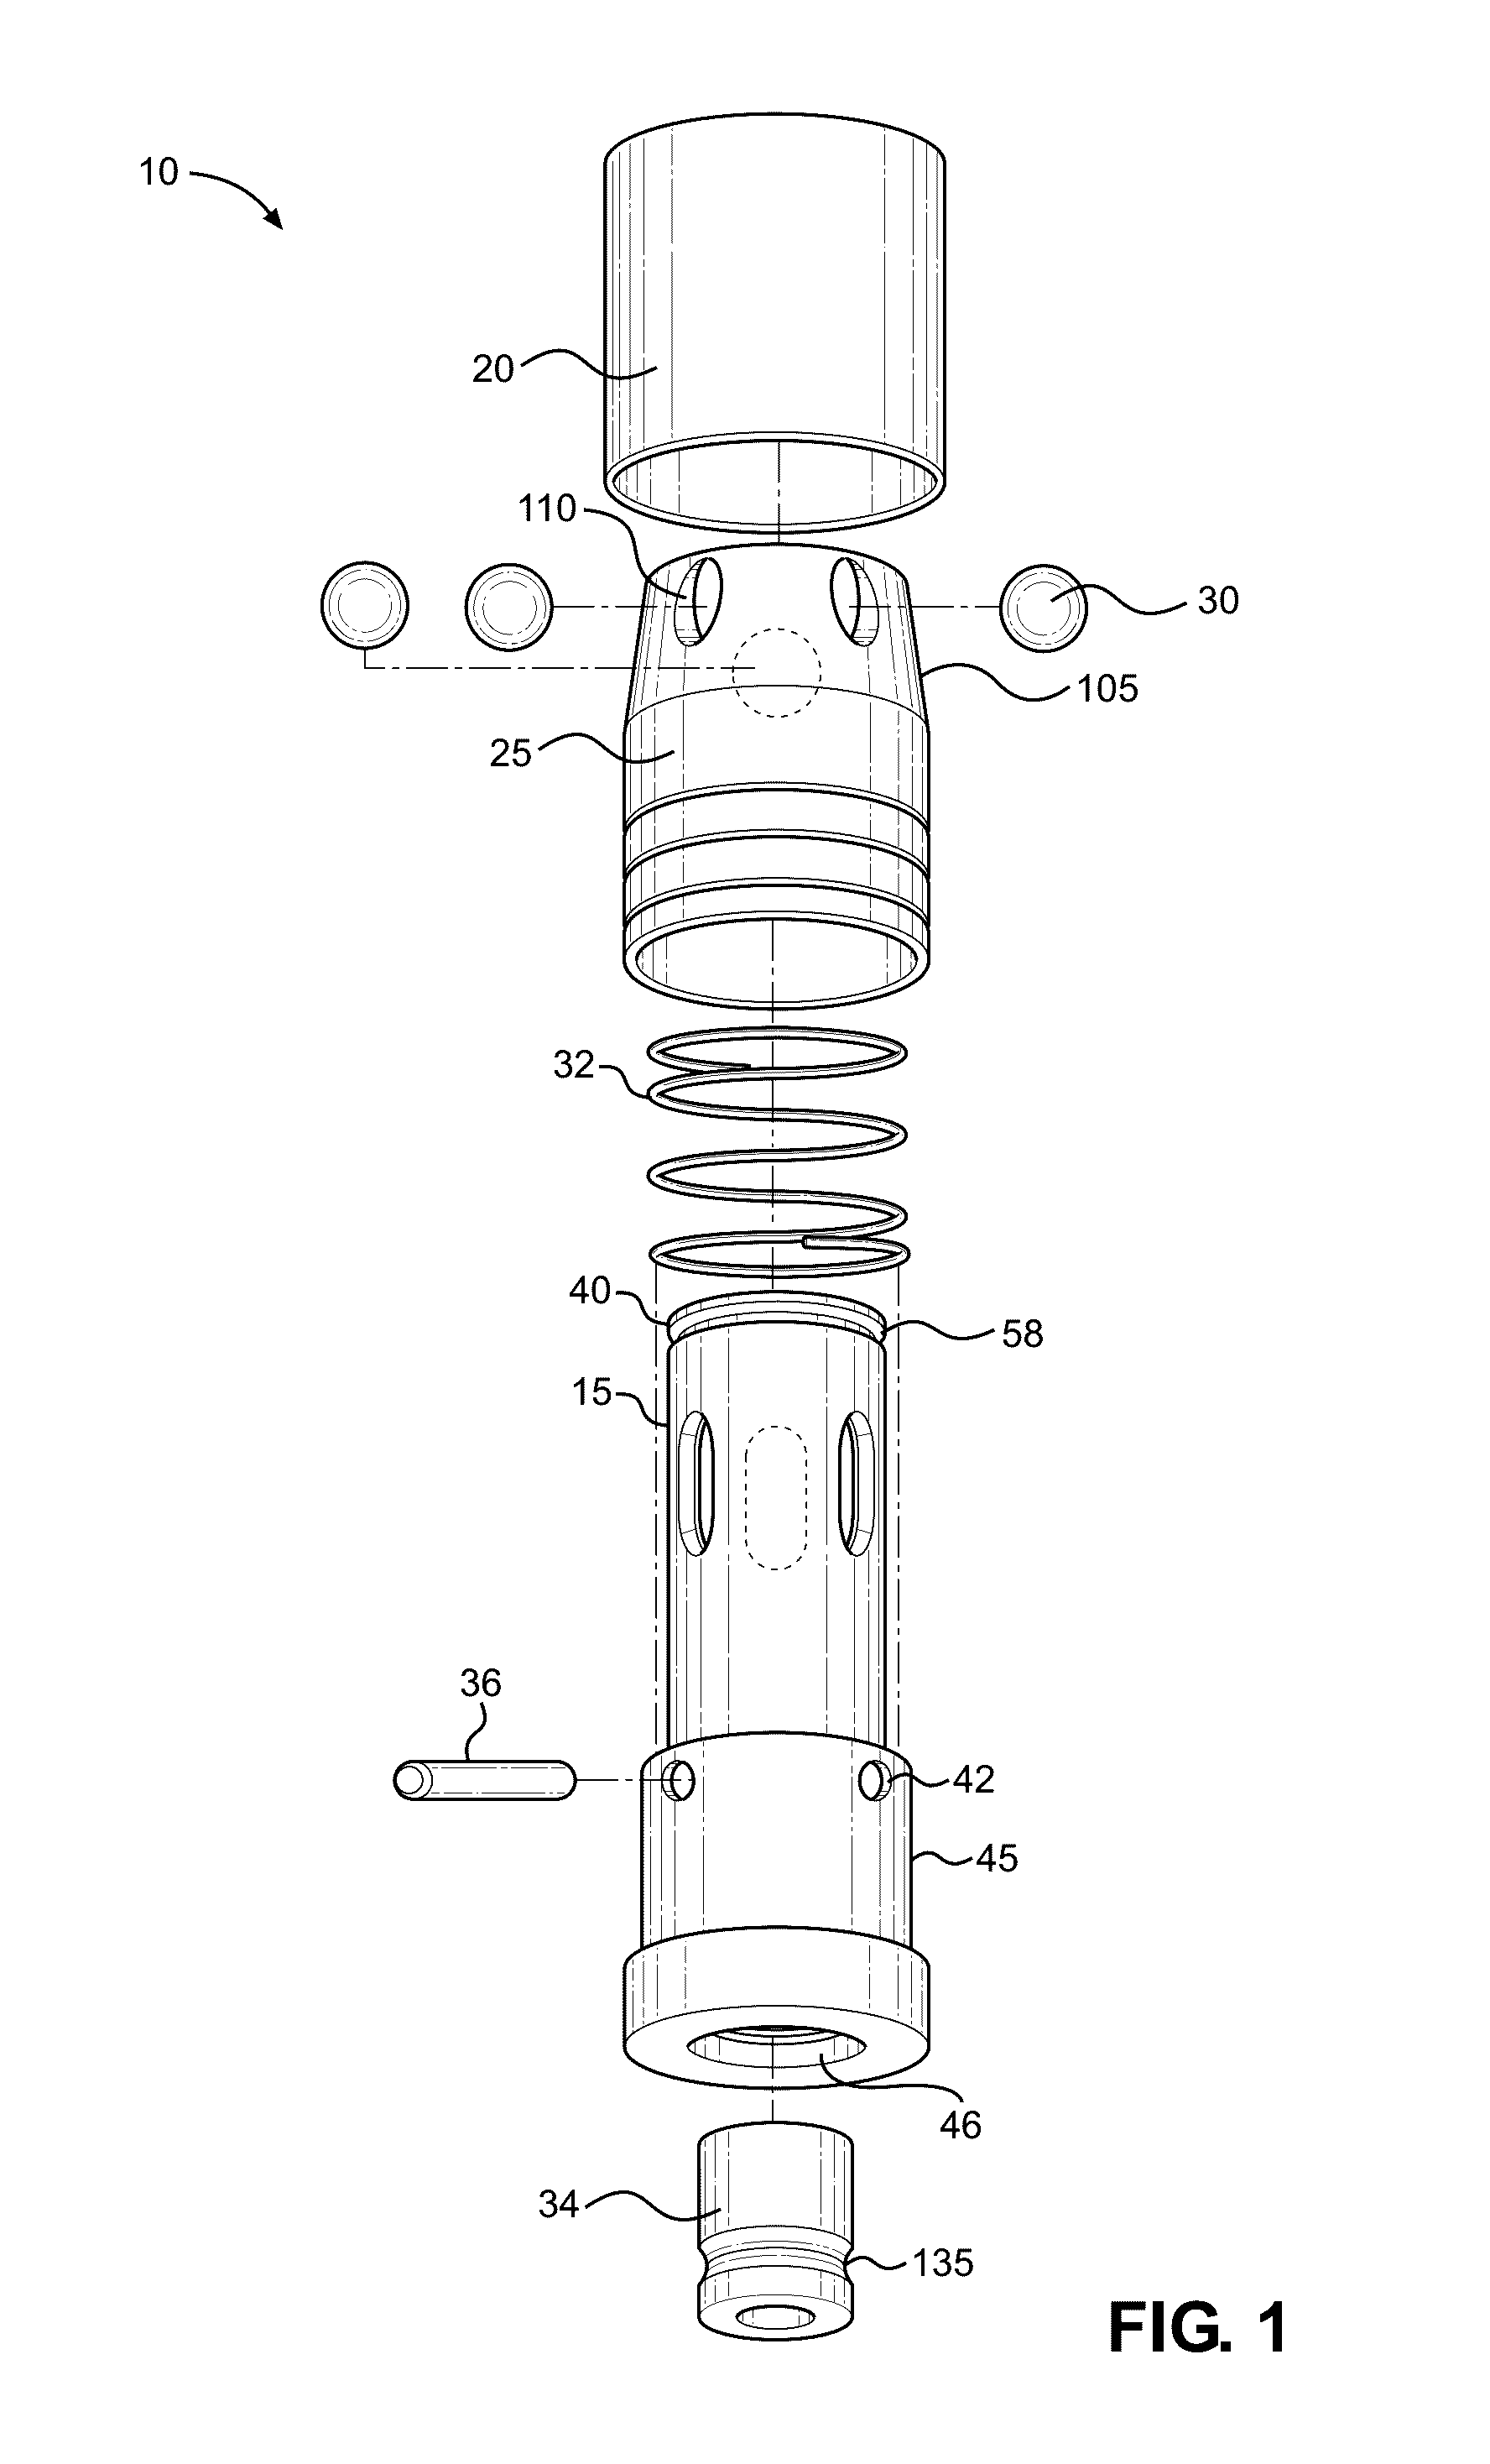 Drill chuck assembly